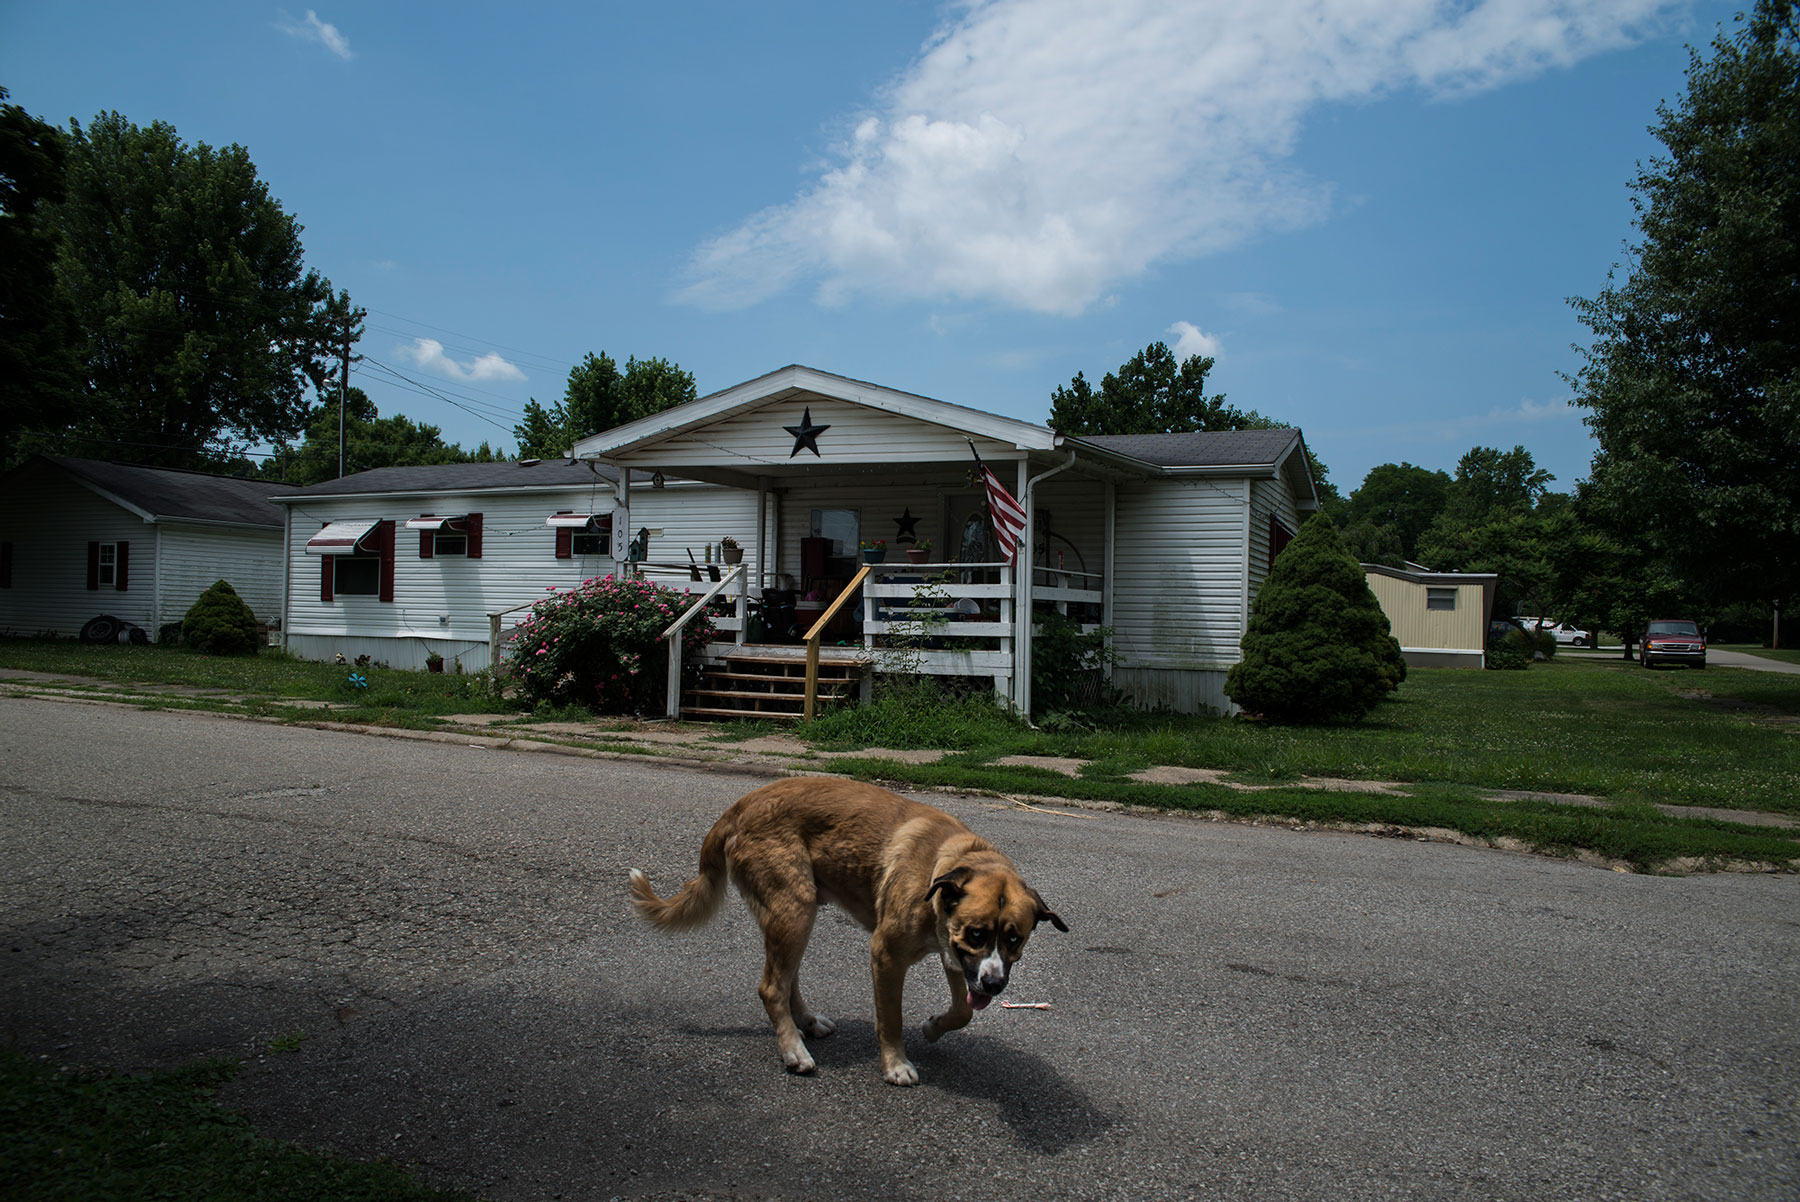 A dog plays in the streets of Newport, Indiana, located in Vermillion County. Indiana has the highest voter removal rate in comparison with other states, and Vermillion County has a higher removal rate than any other county in Indiana. (Roman Knertser/News21)